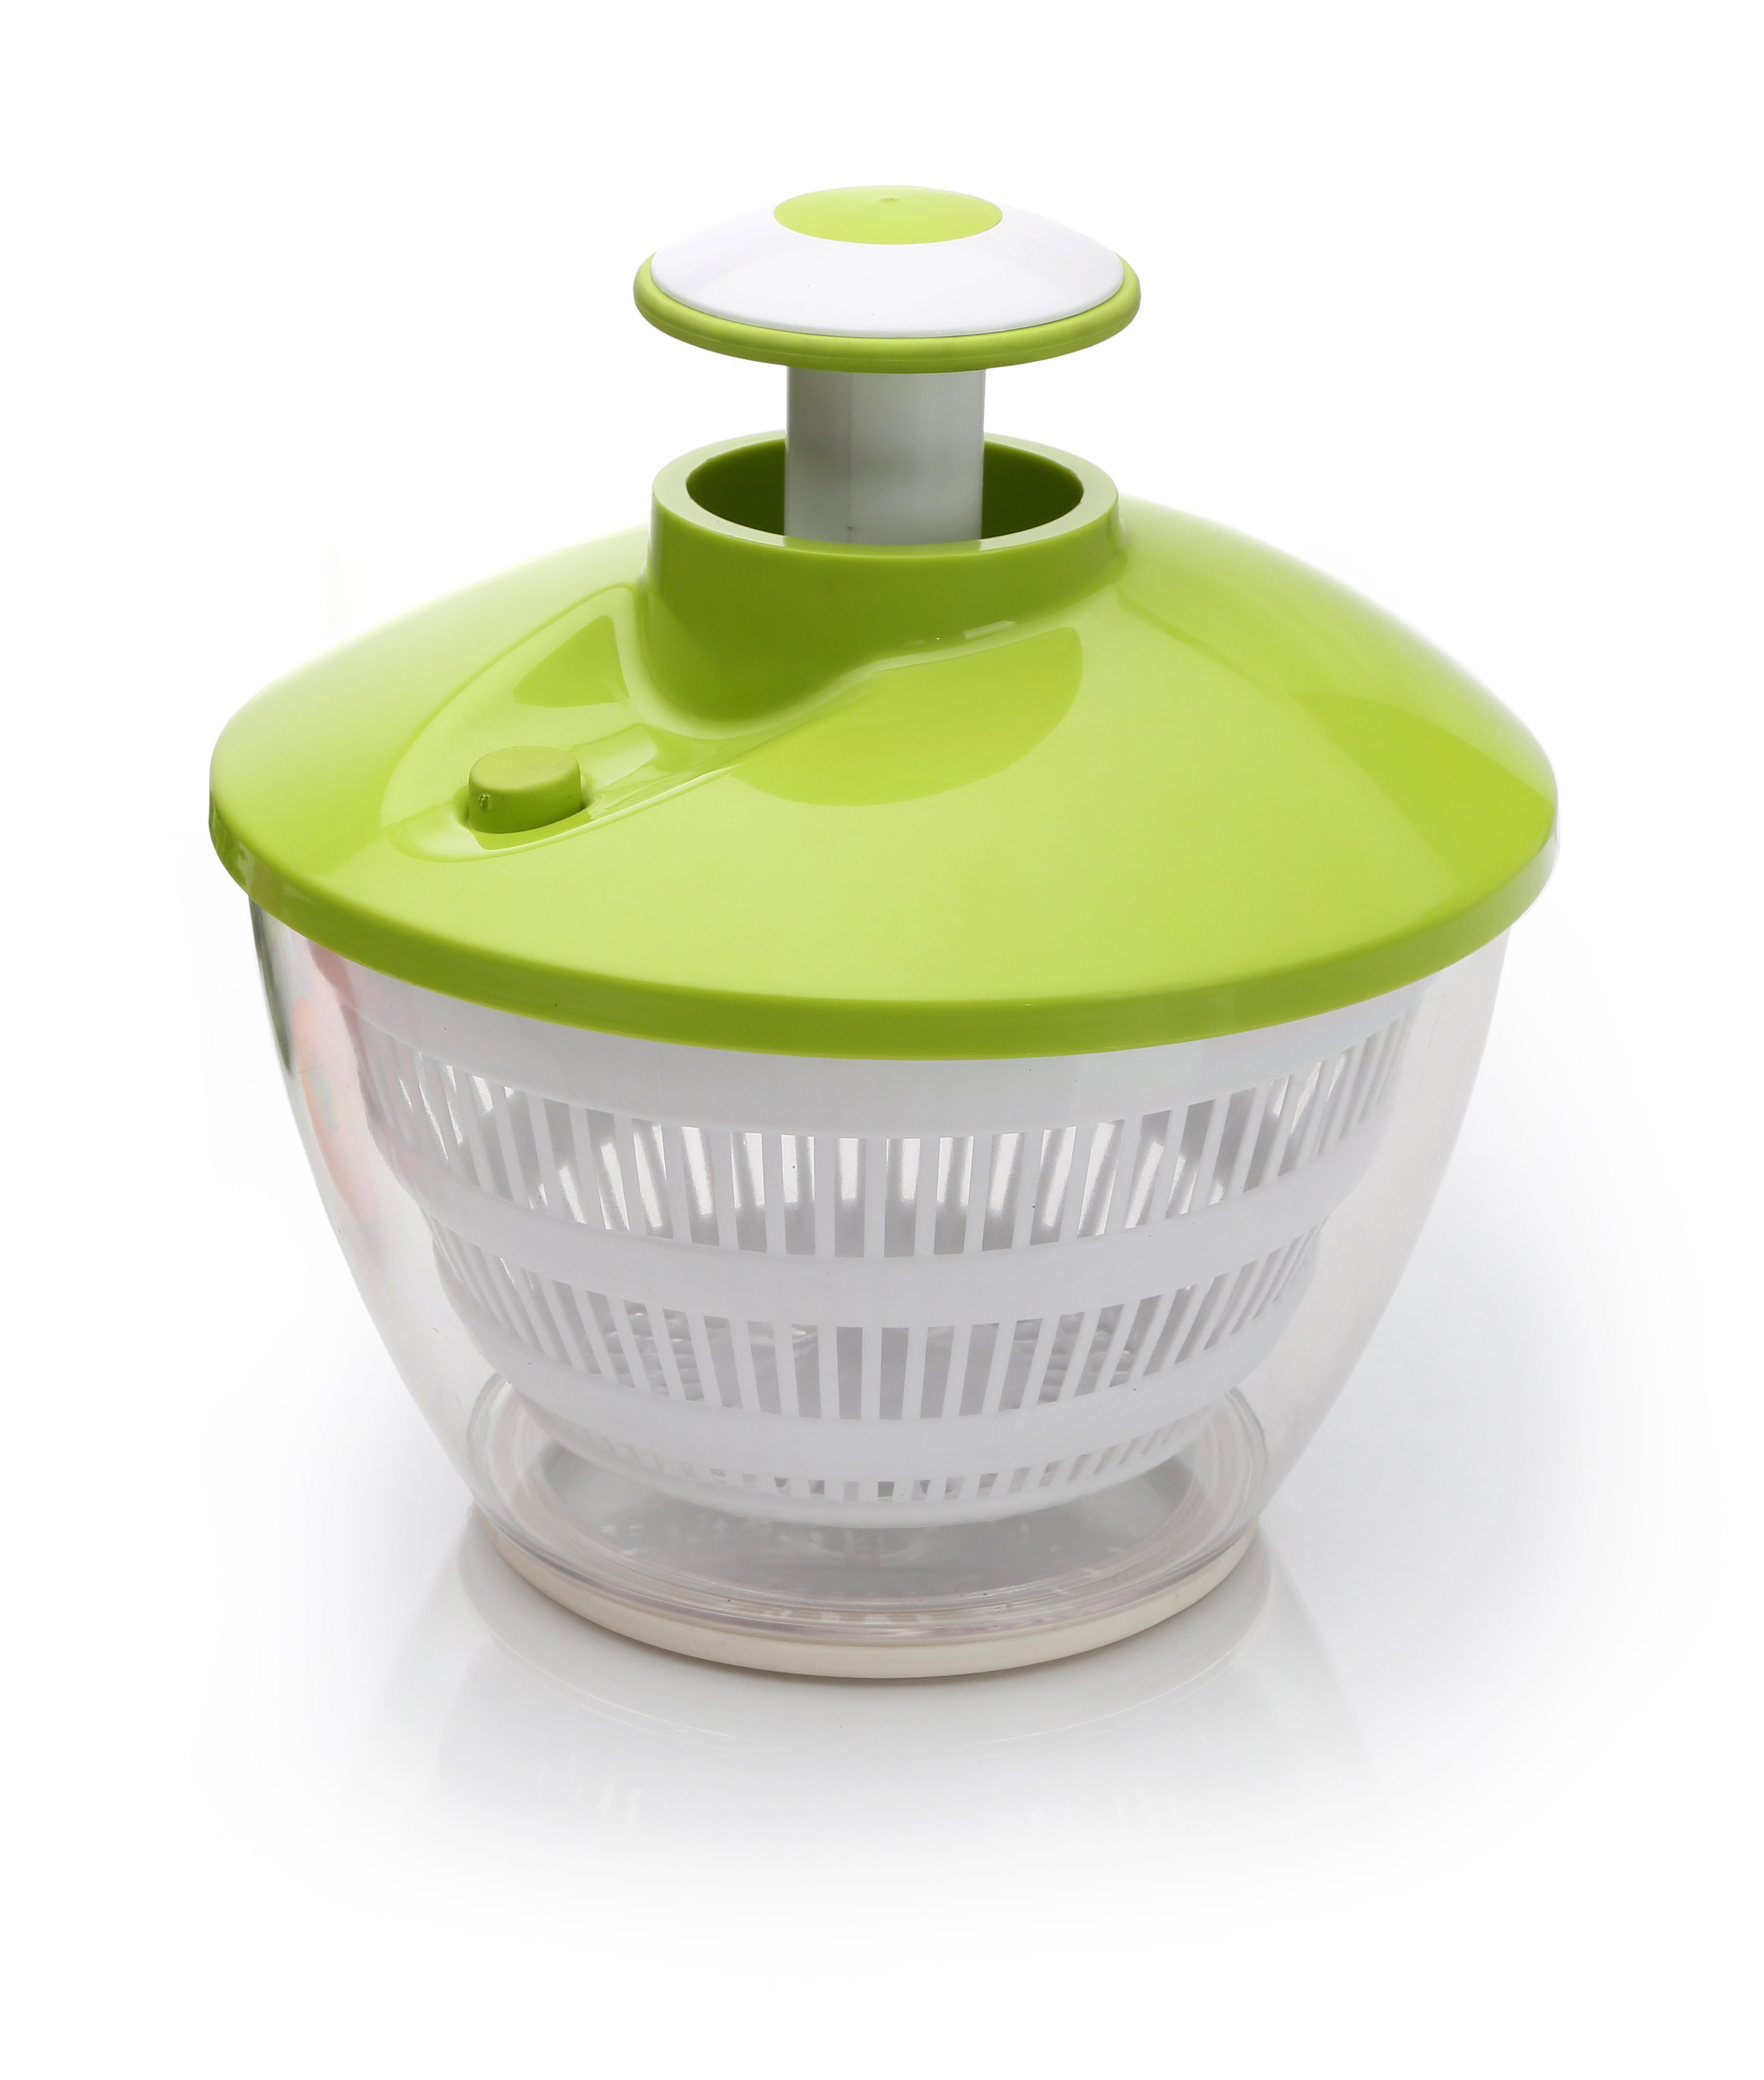 Clean Salads and Produce Lettuce Spinner Color : Large Crispy Easy-to-use Professional Pump Spinner for Fresh